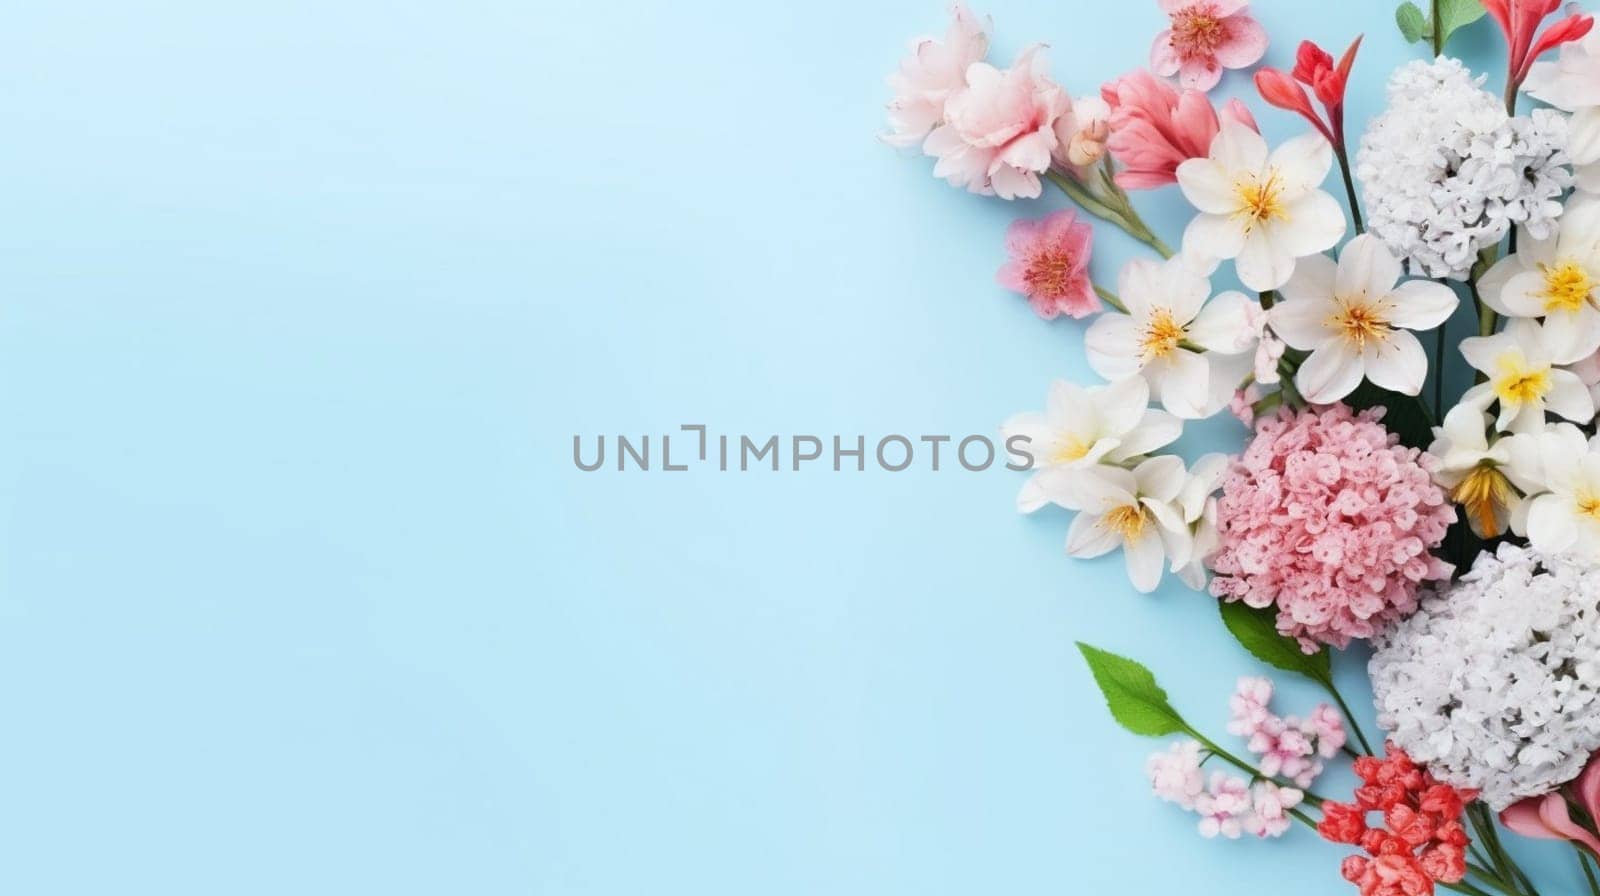 A beautiful bouquet of pink and white flowers arranged creatively on a blue background, resembling a piece of art in the sky. The delicate petals and twigs make a stunning display of cut flowers